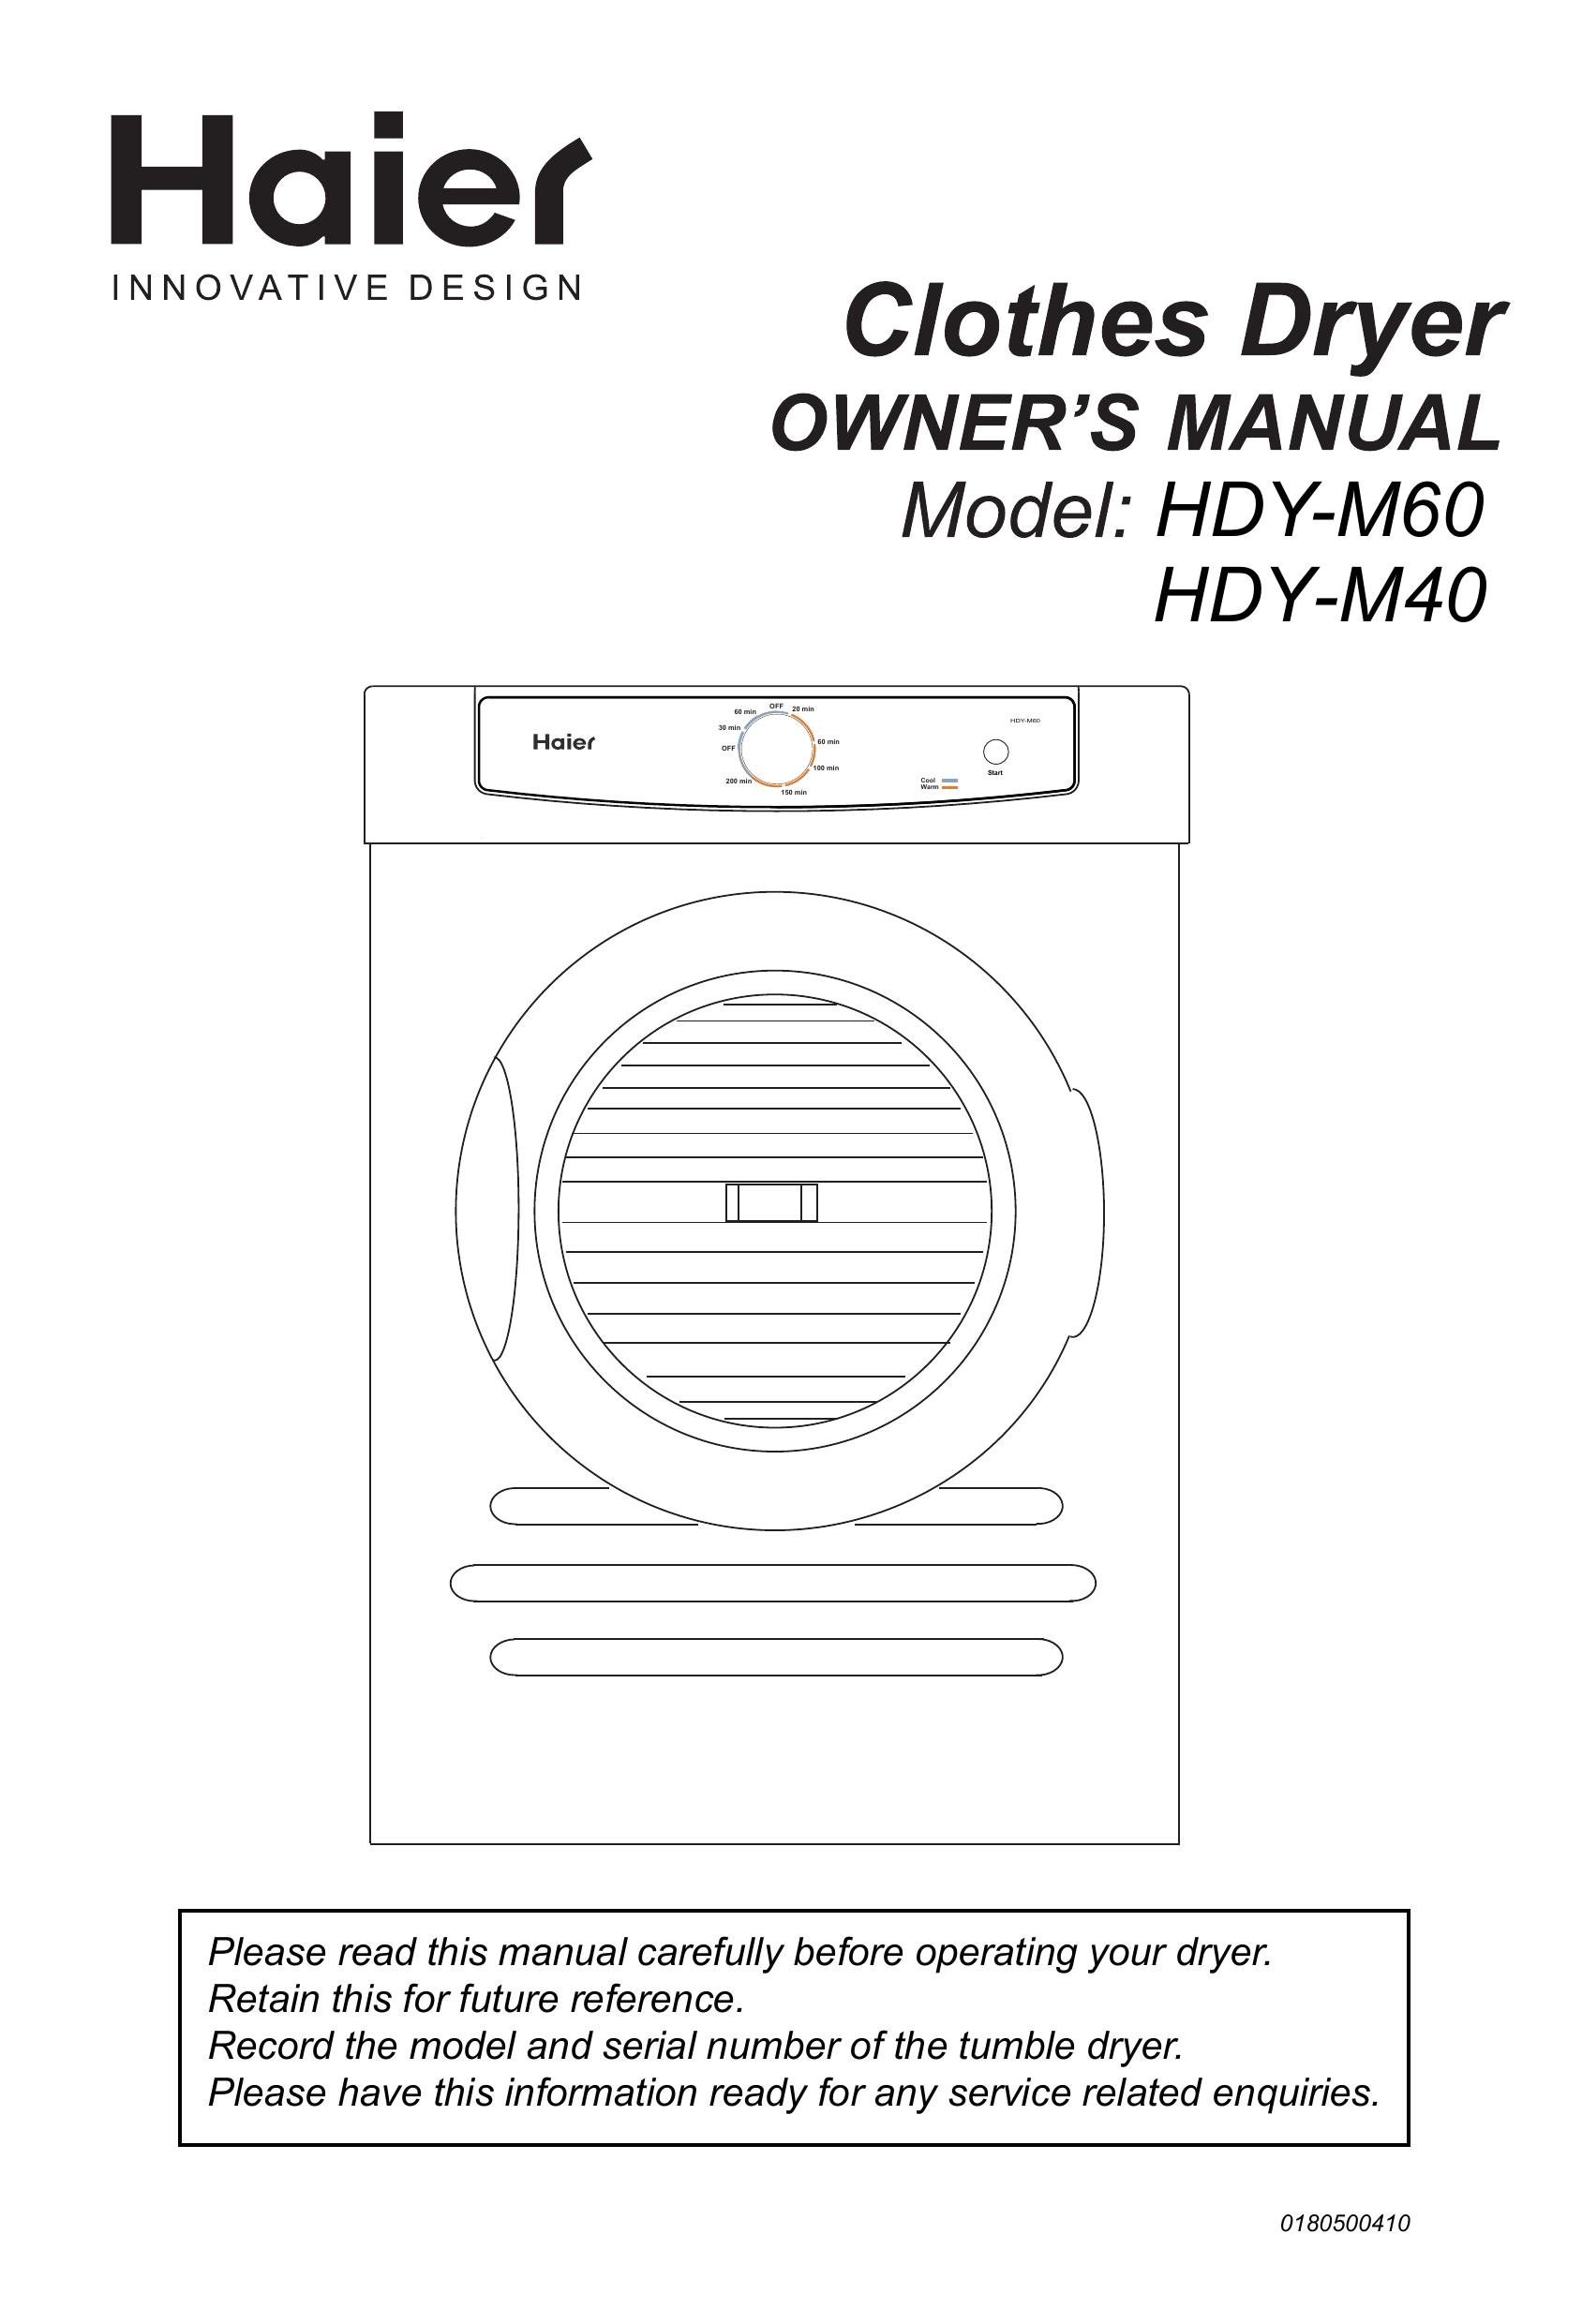 Haier HDY-M60 Clothes Dryer User Manual